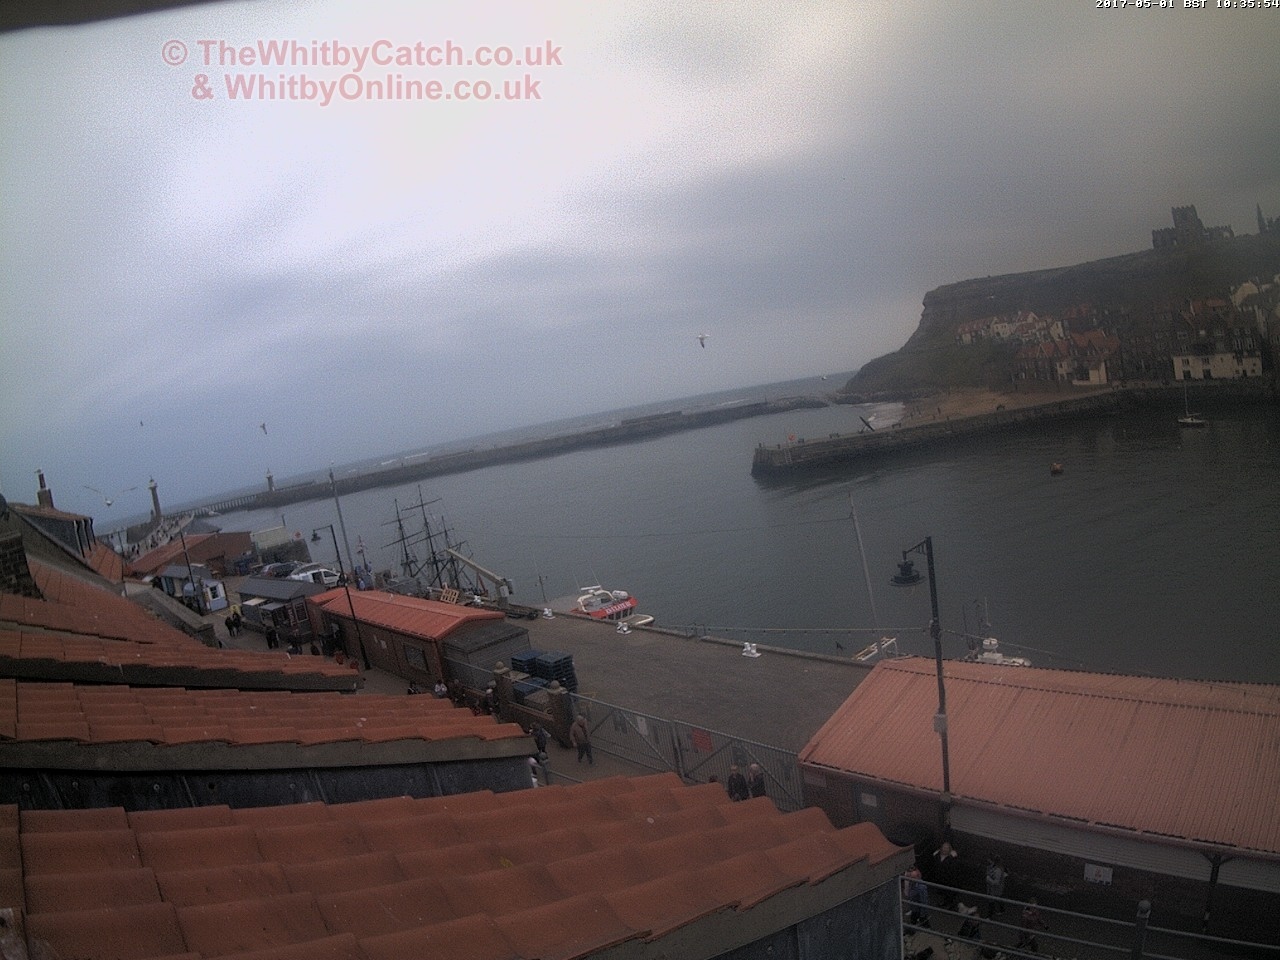 Whitby Mon 1st May 2017 10:36.